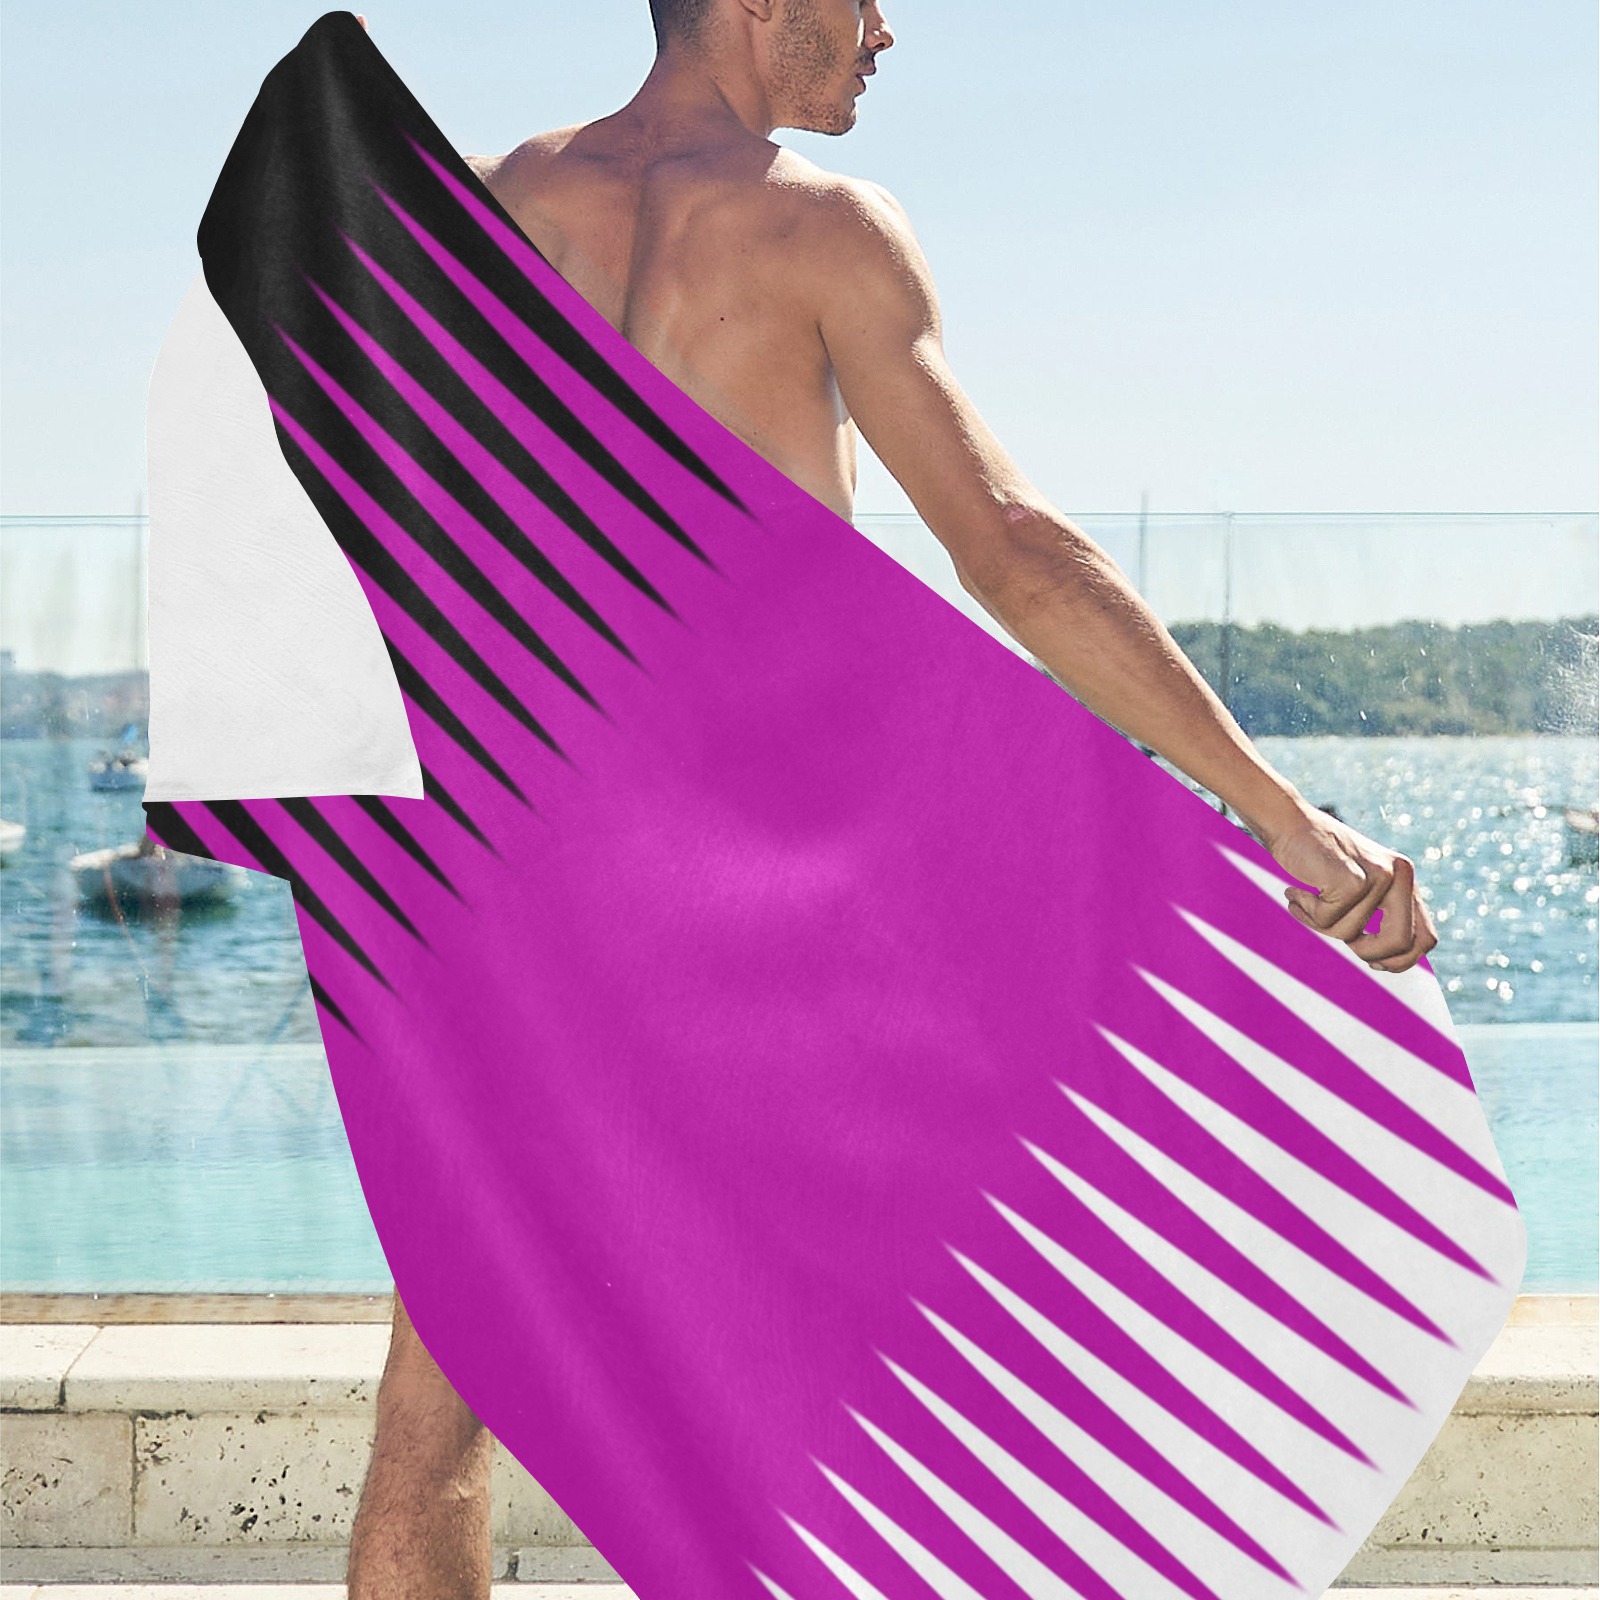 Wave Design Pink and Black Beach Towel 32"x 71"